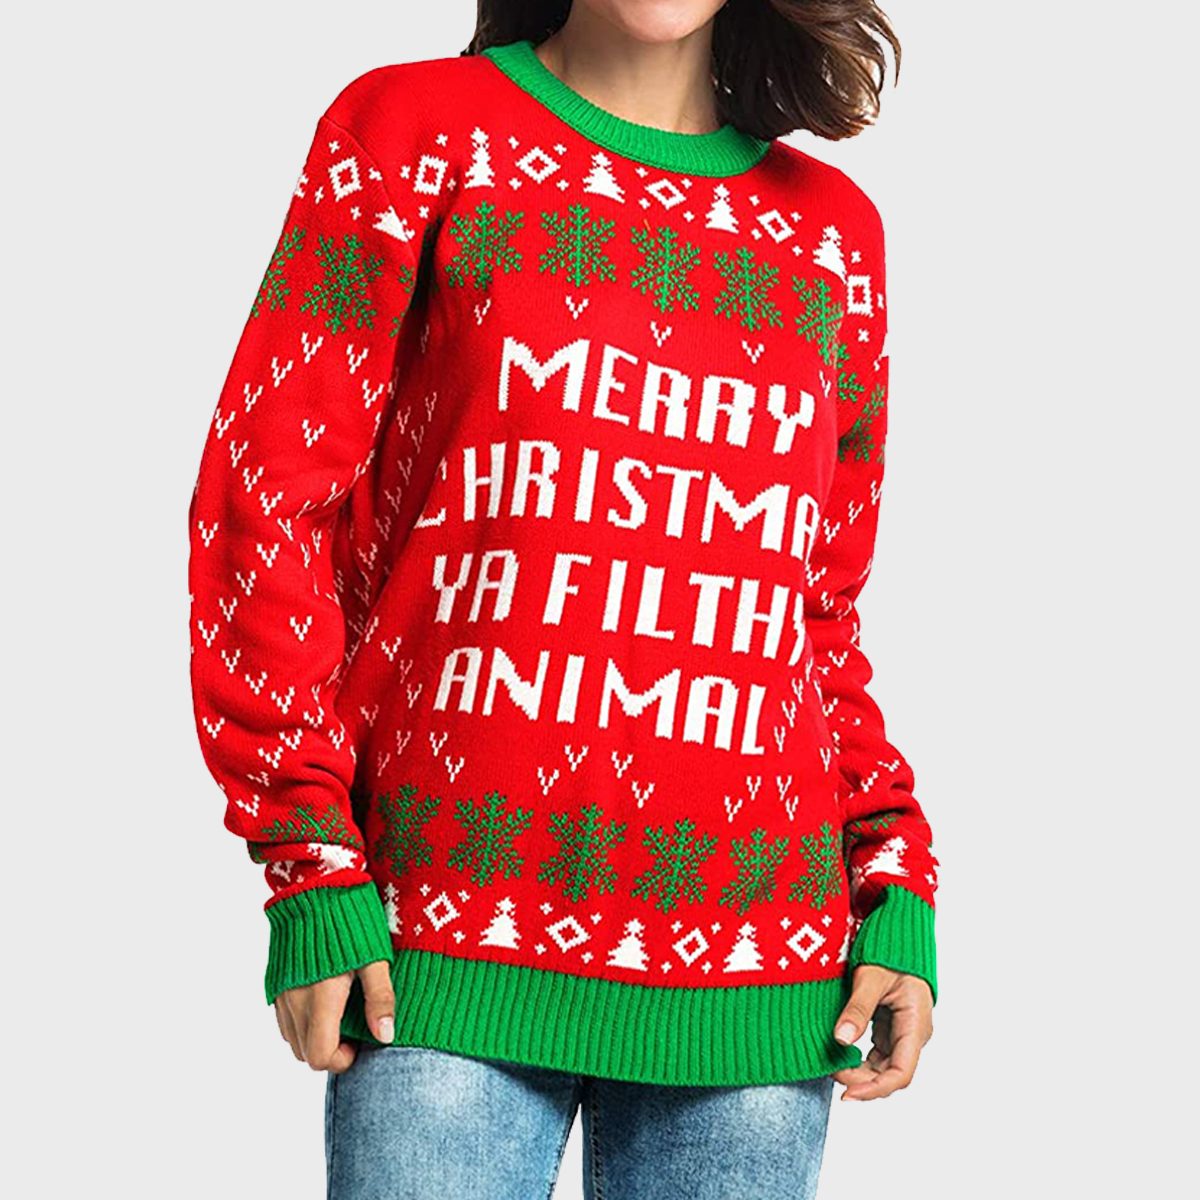 28 Best Ugly Christmas Sweaters 2021 | Sweaters for Women and Men